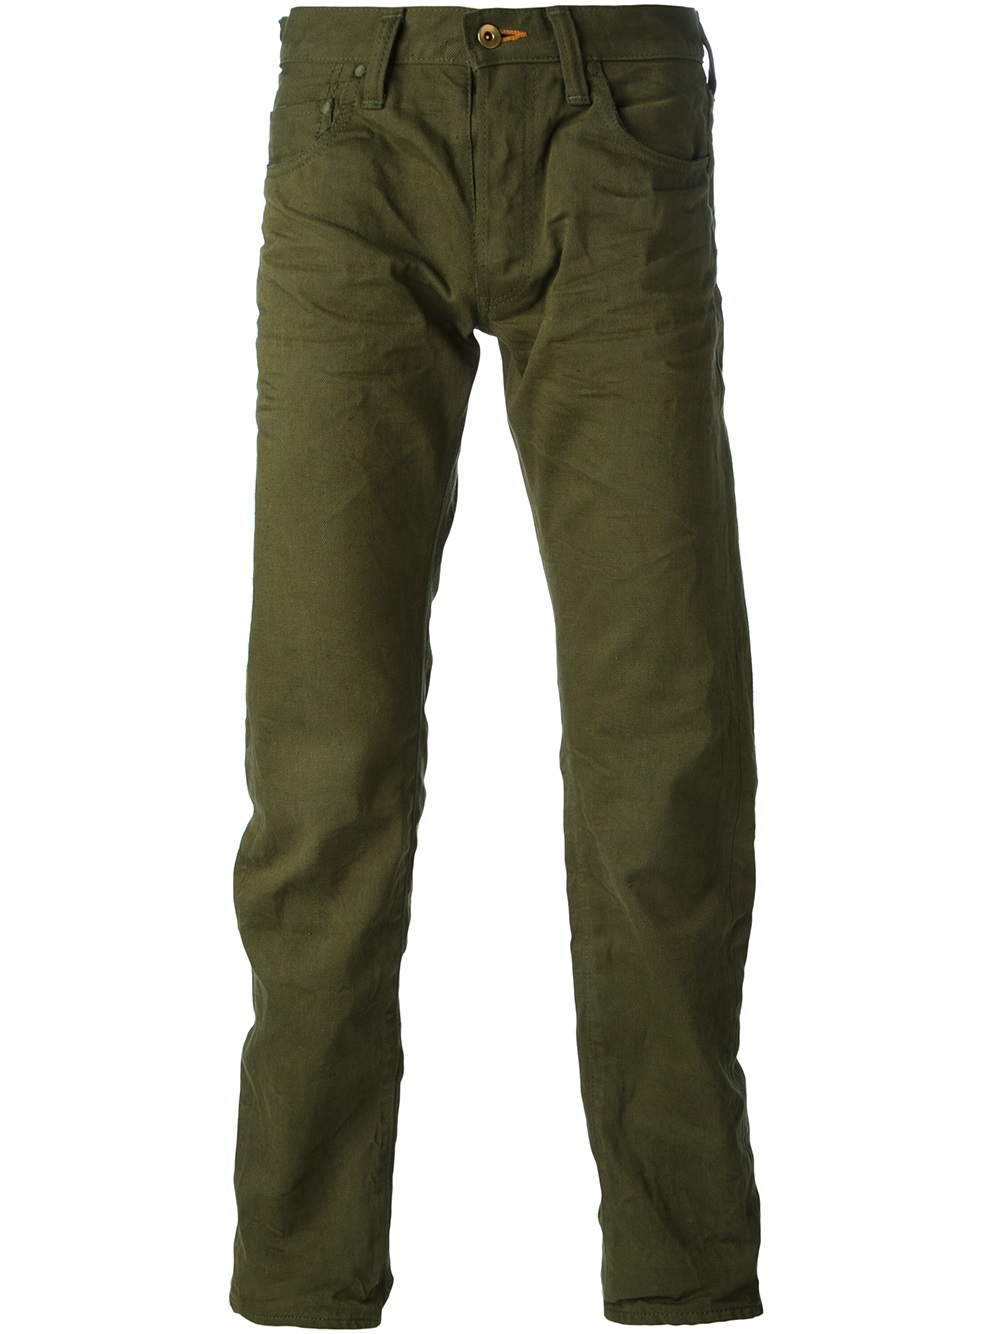 Lyst - Prps Noir Limited Edition Jeans in Green for Men